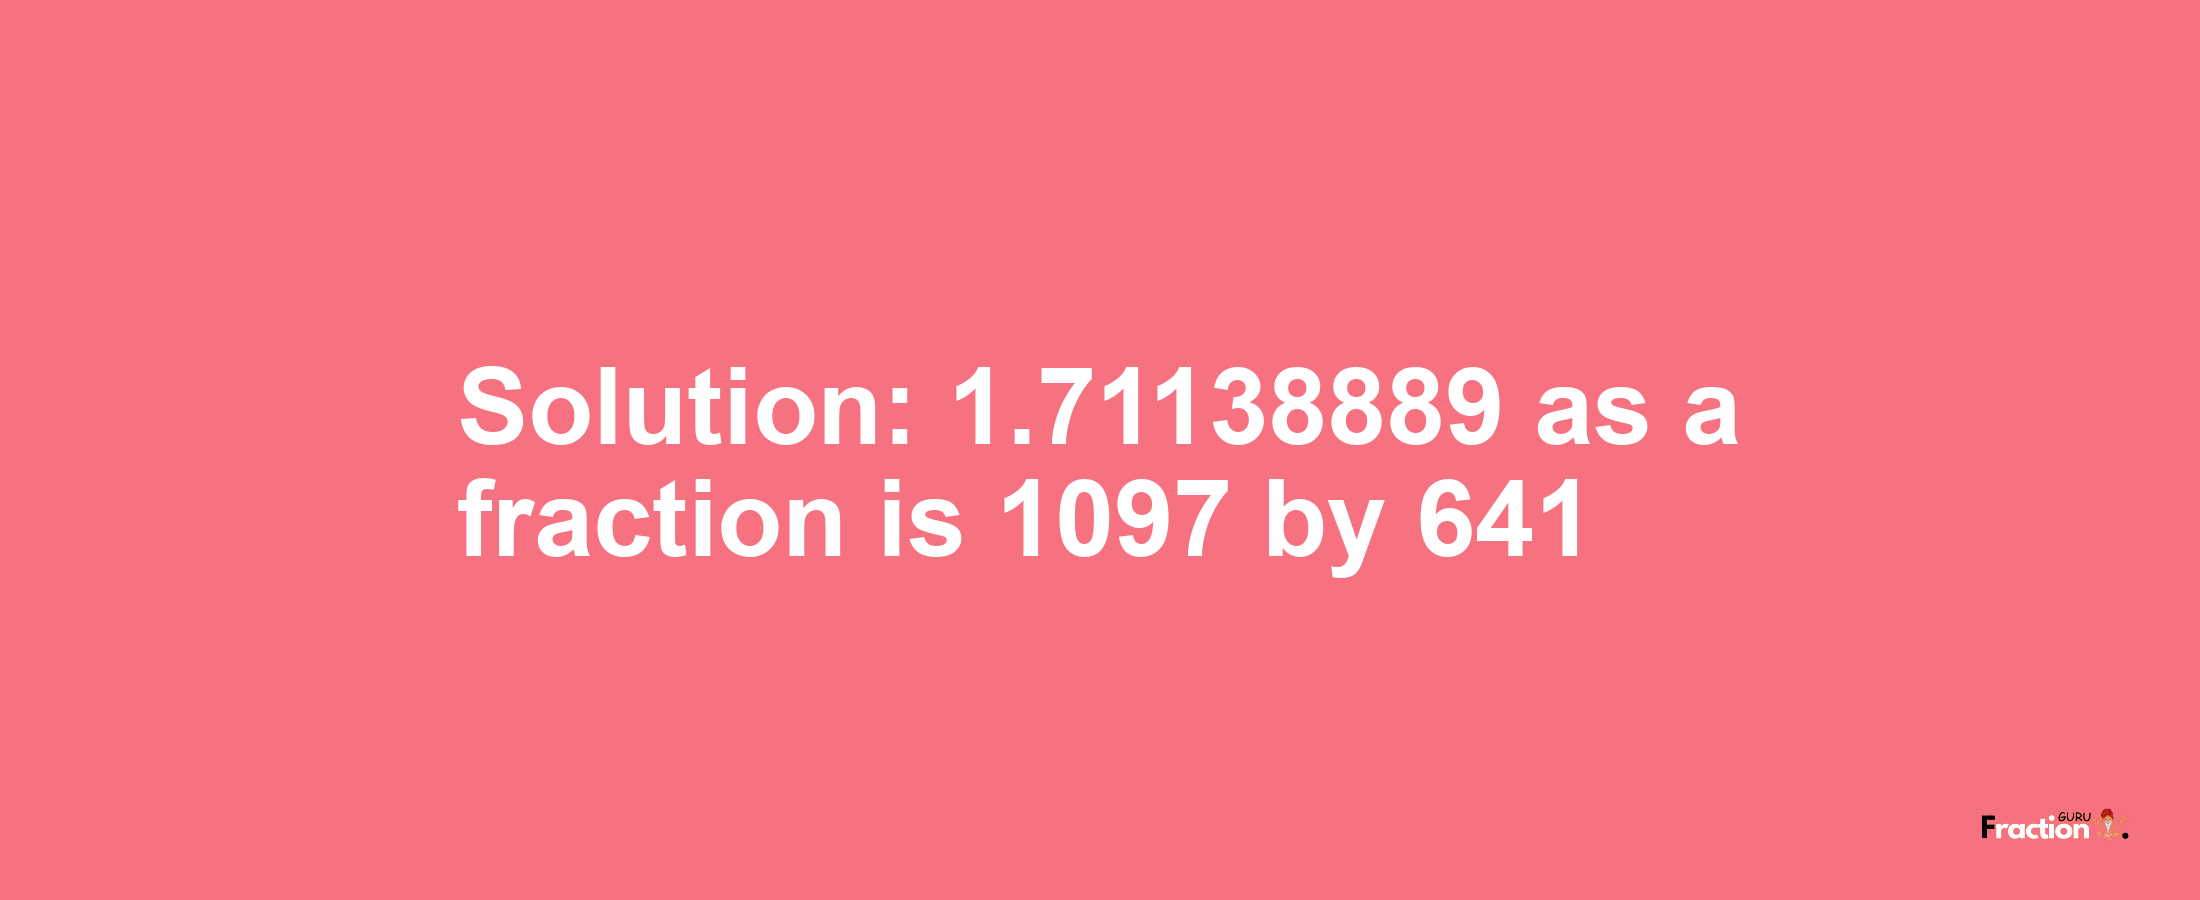 Solution:1.71138889 as a fraction is 1097/641